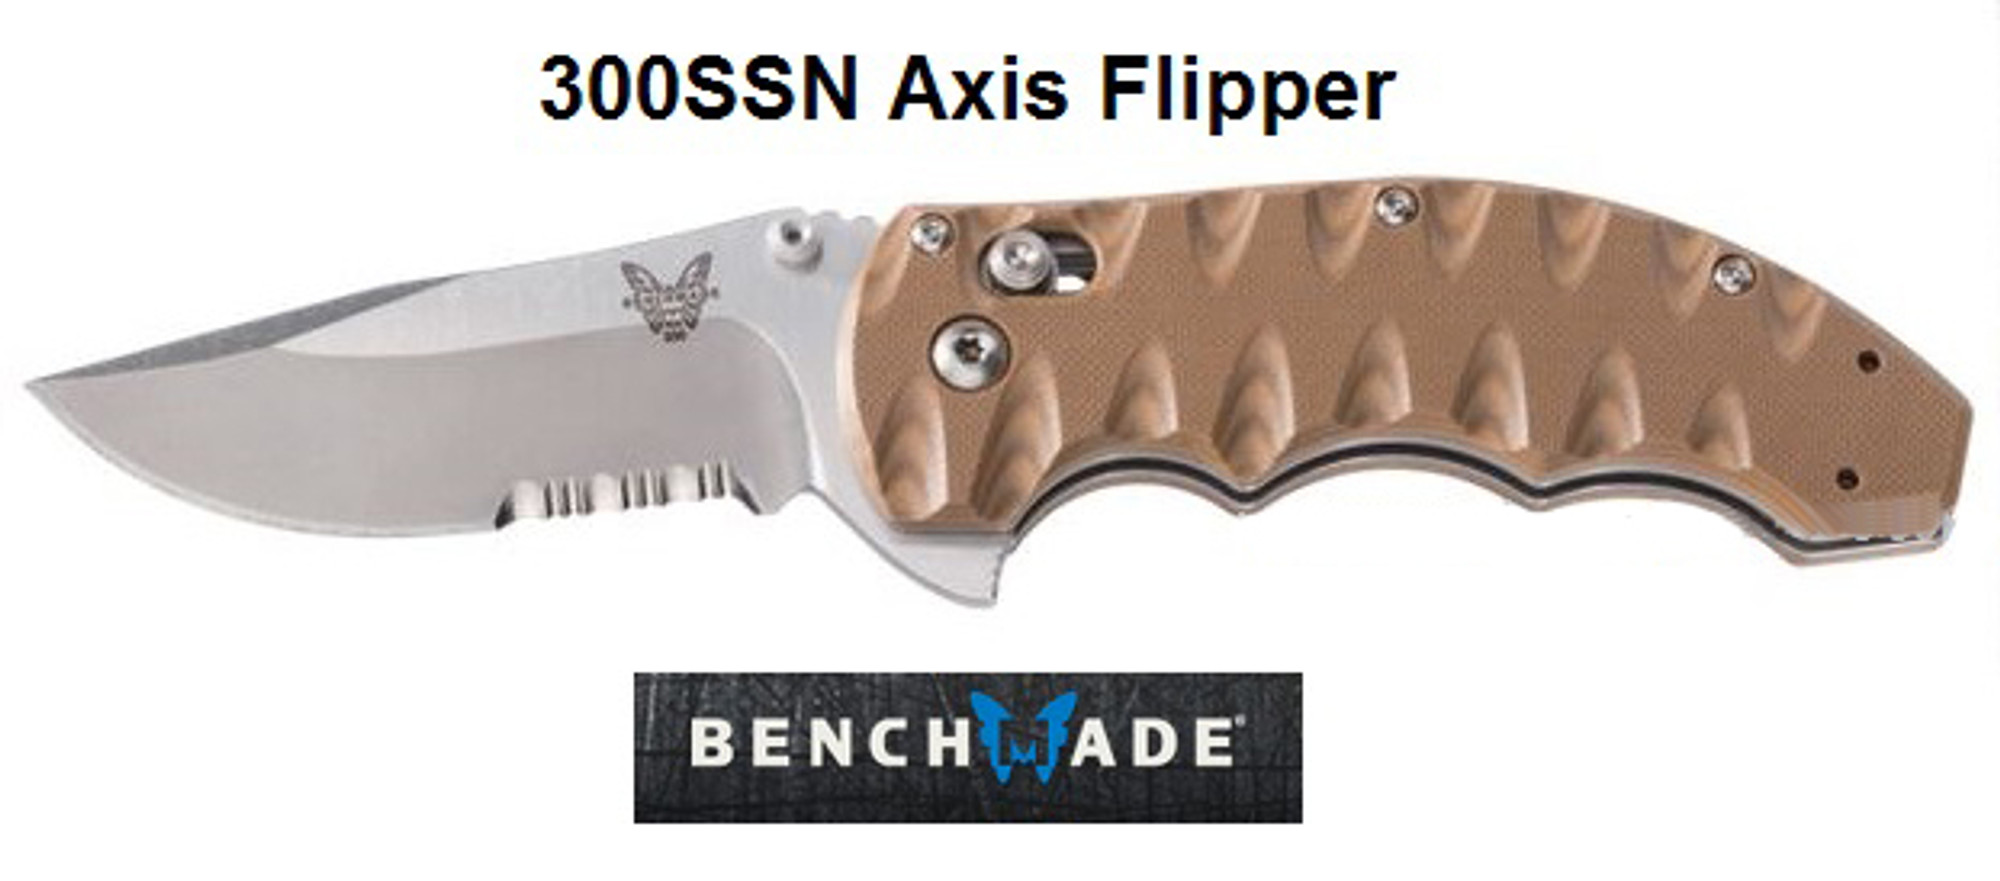 Benchmade 300SSN Axis Flipper Serrated